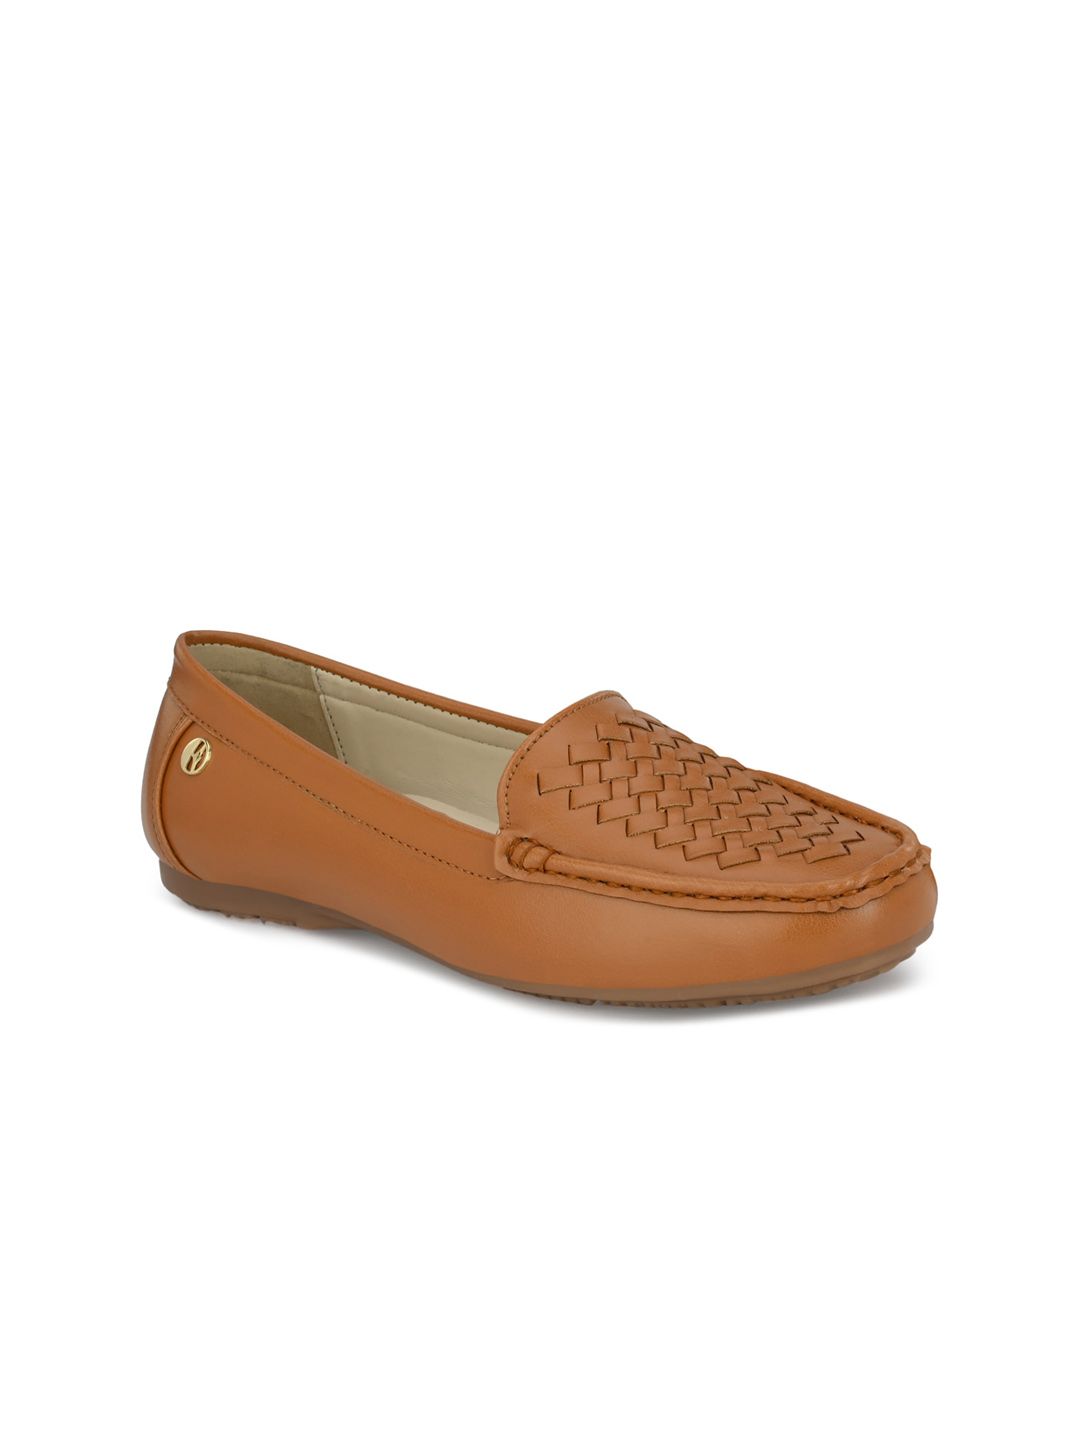 ELLE Women Woven Design Loafers Price in India